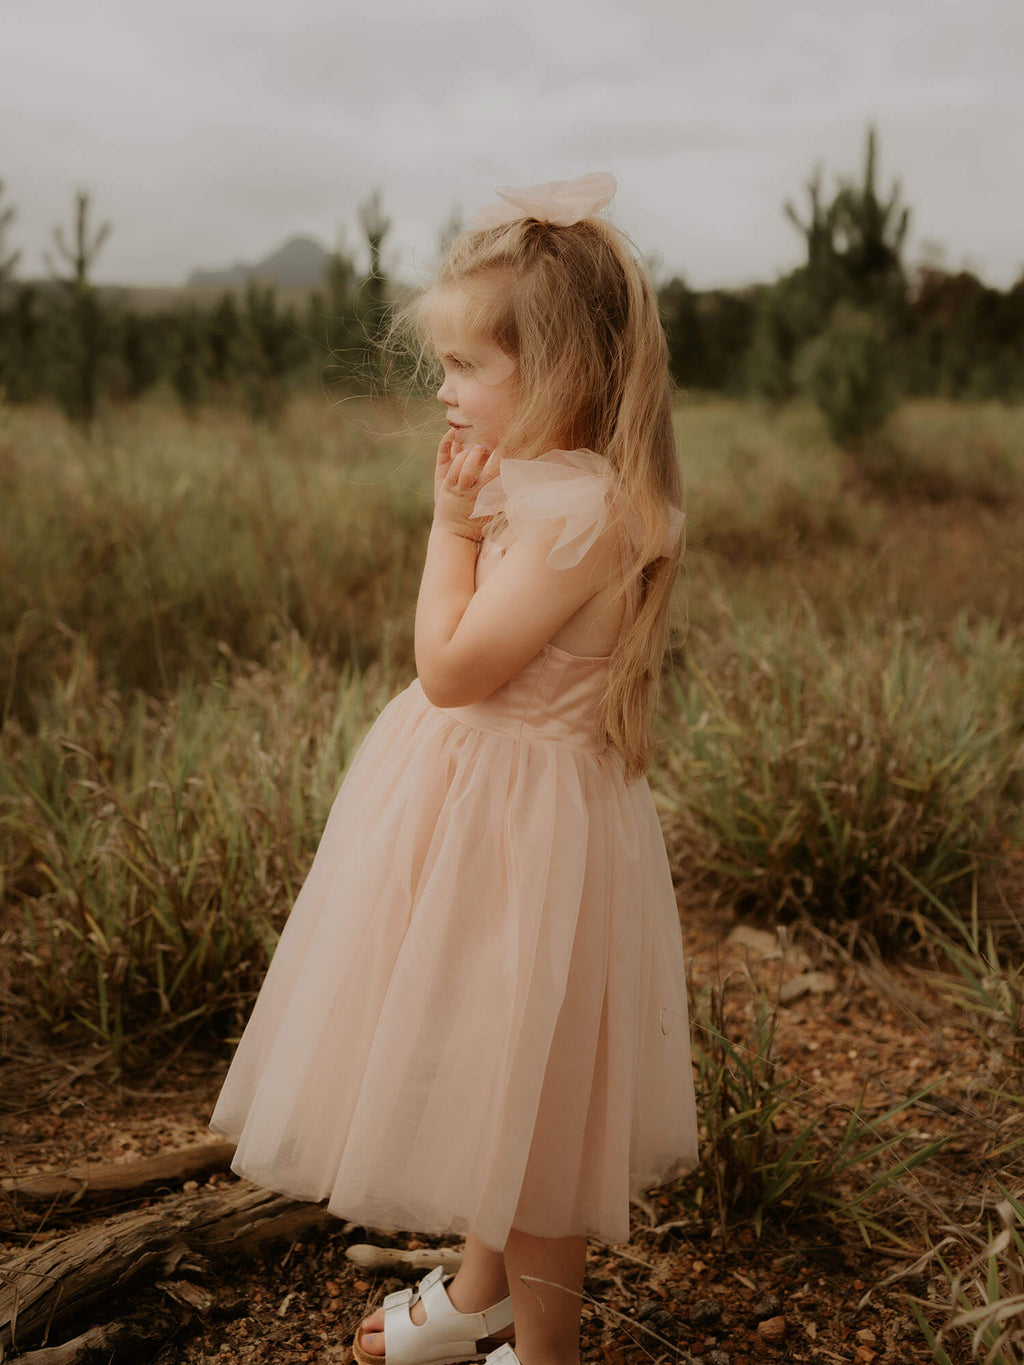 Isla champagne flower girl dress is worn by a young girl. She also wears a matching champagne tulle bow in her hair.